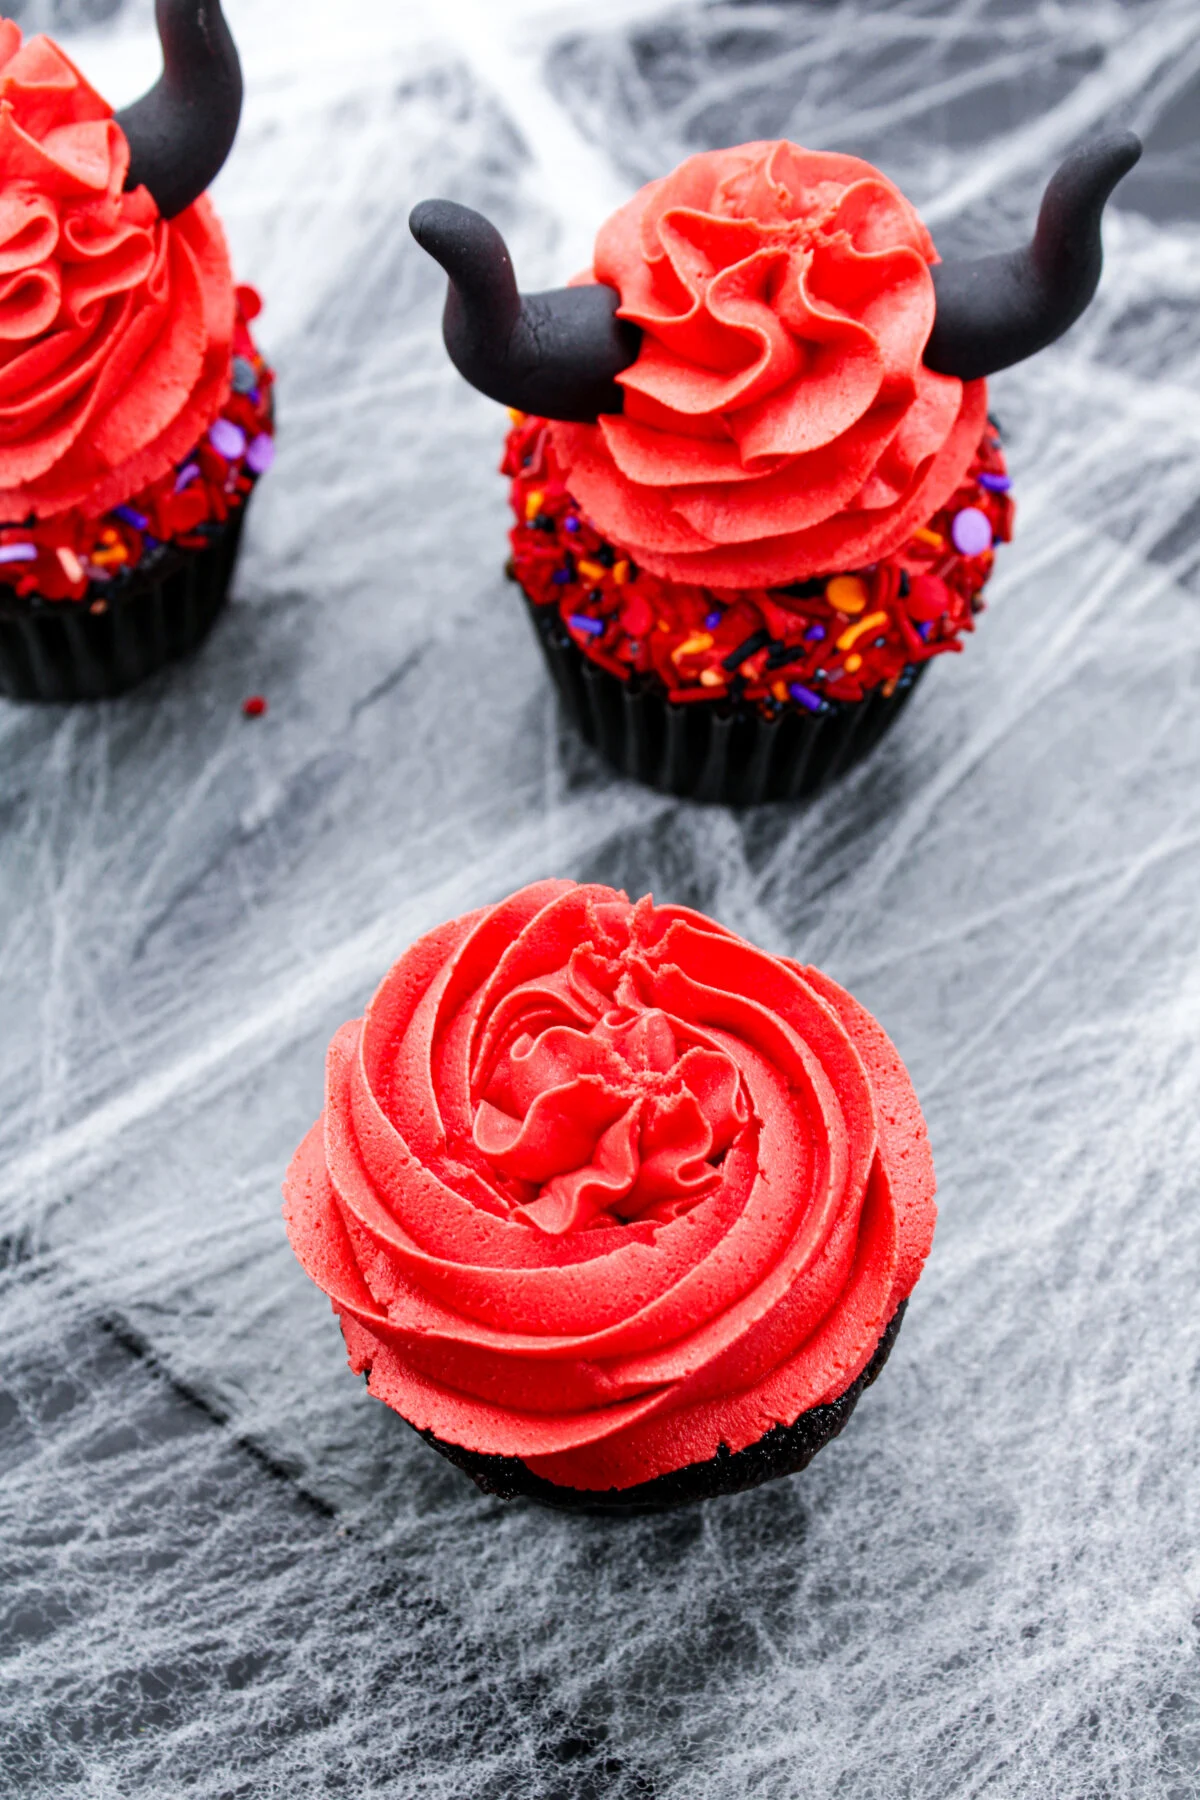 Cupcake frosted with red frosting.